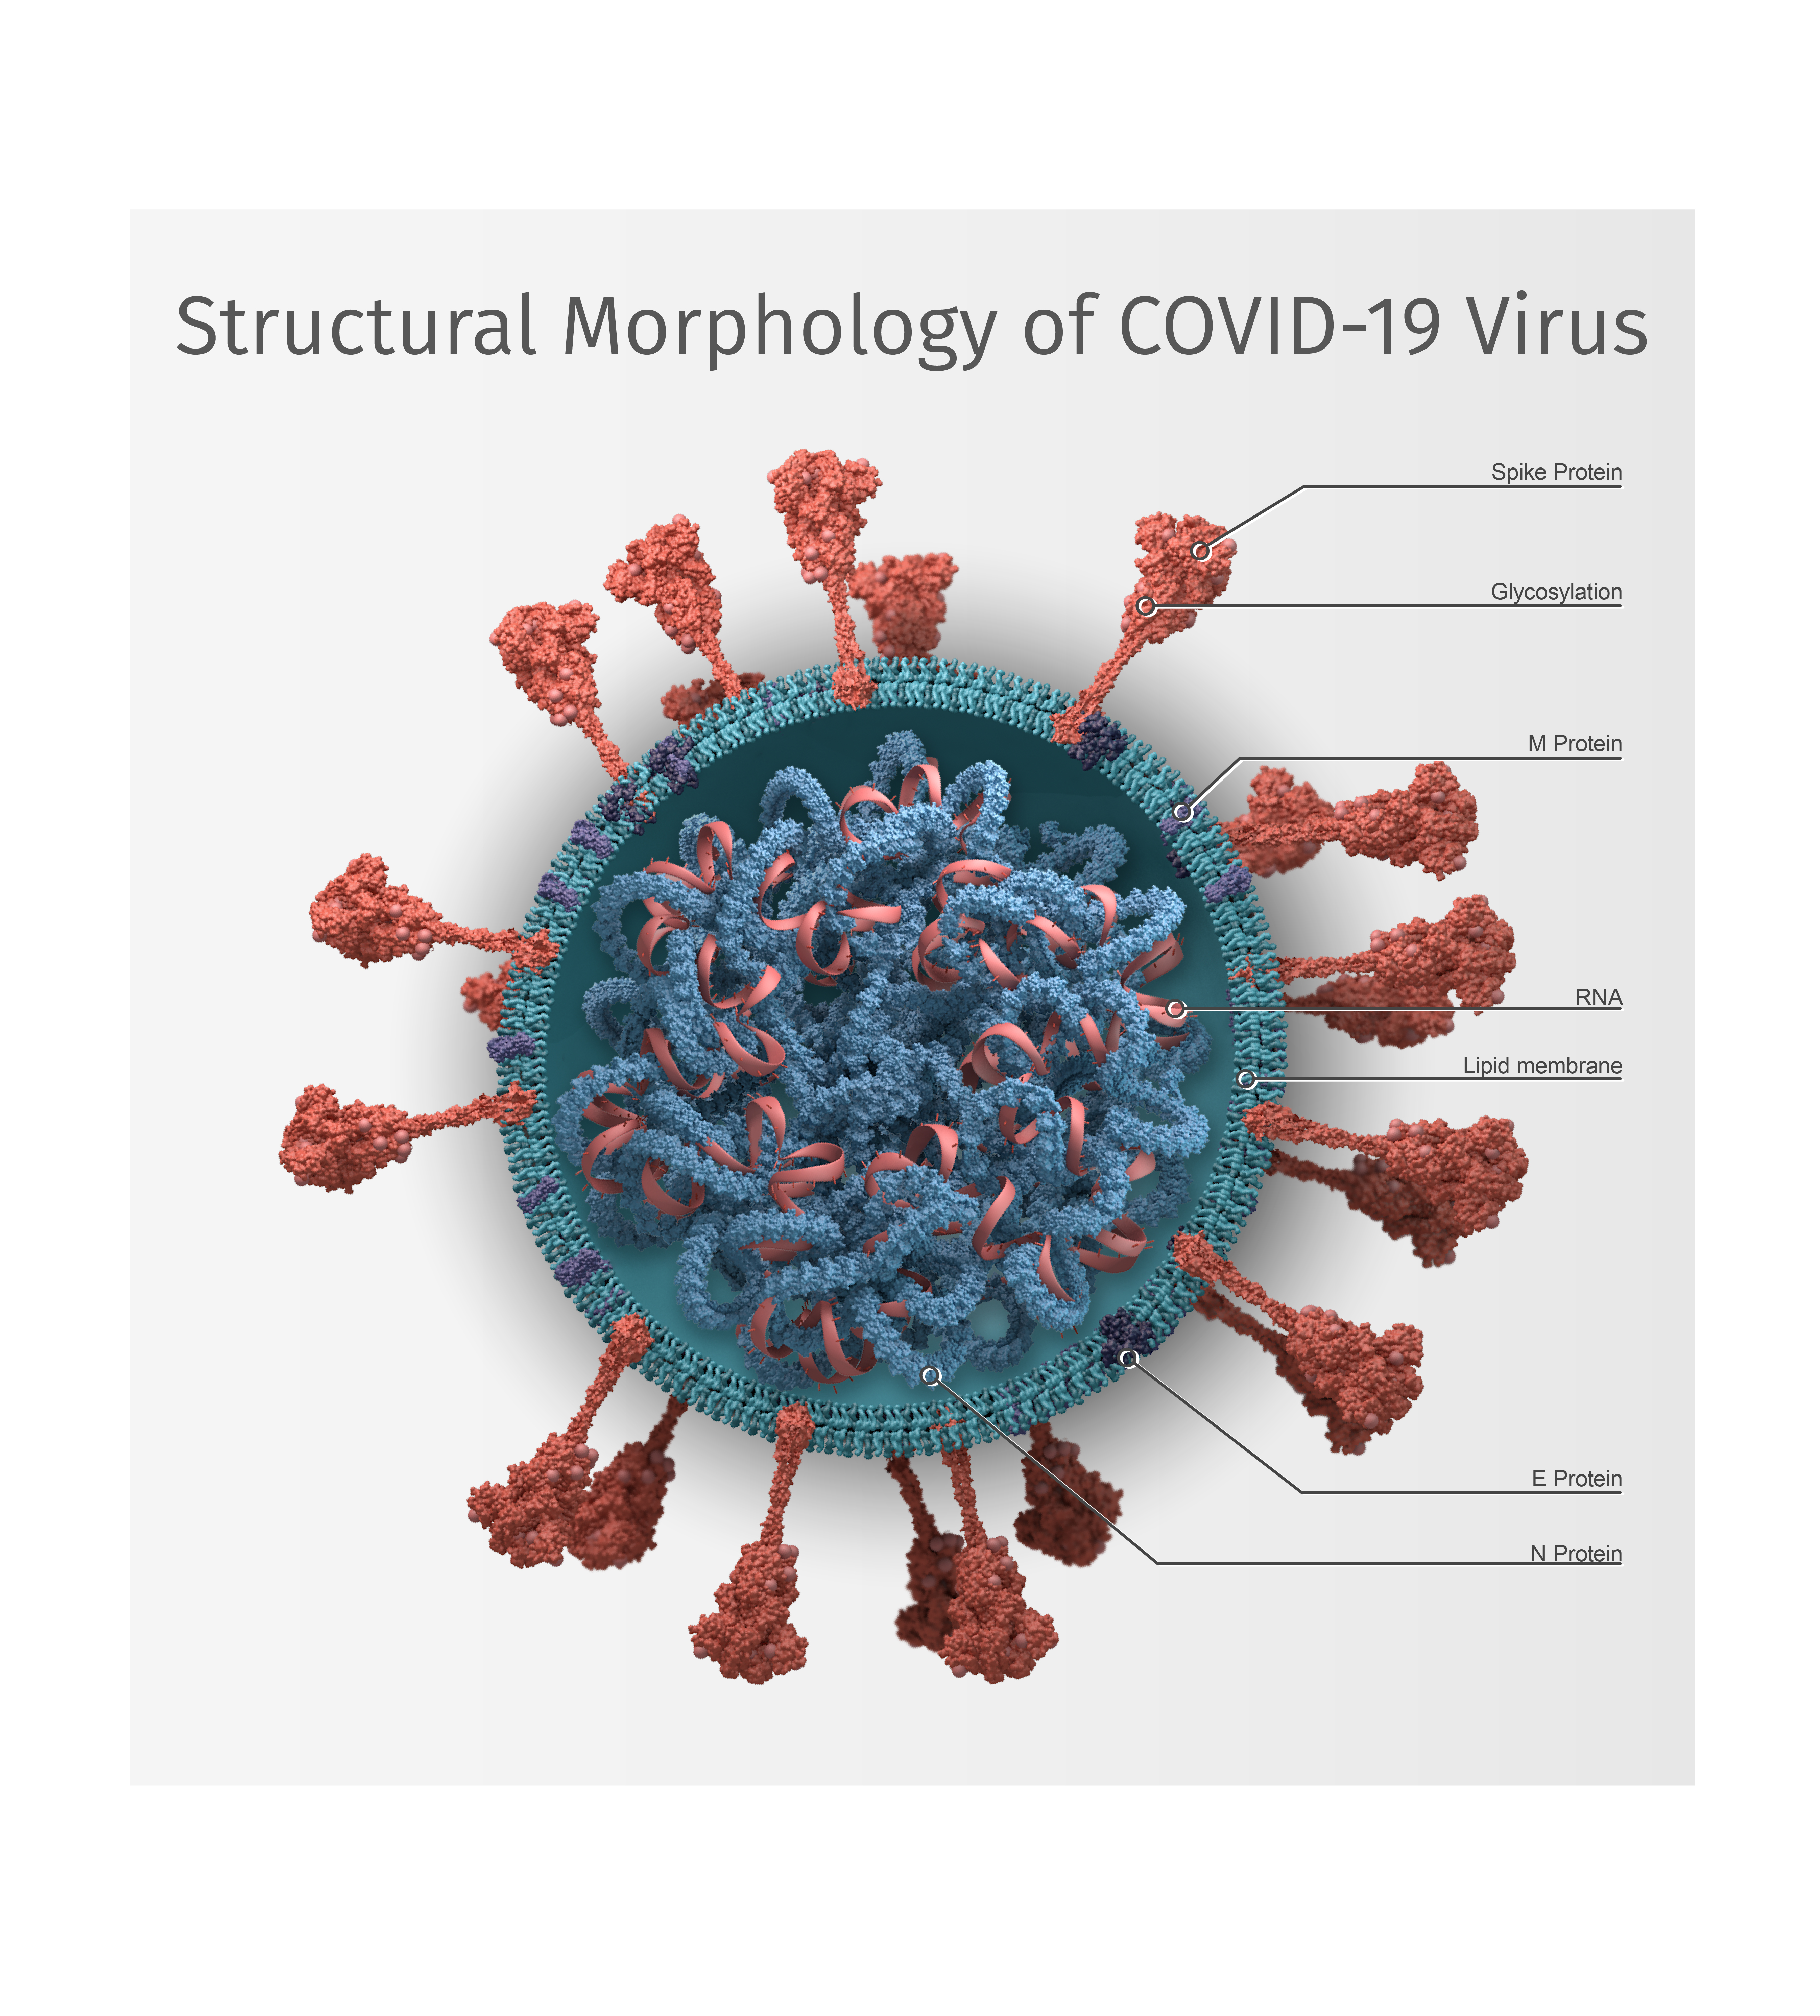 Structural Morphology of the COVID-19 Virus